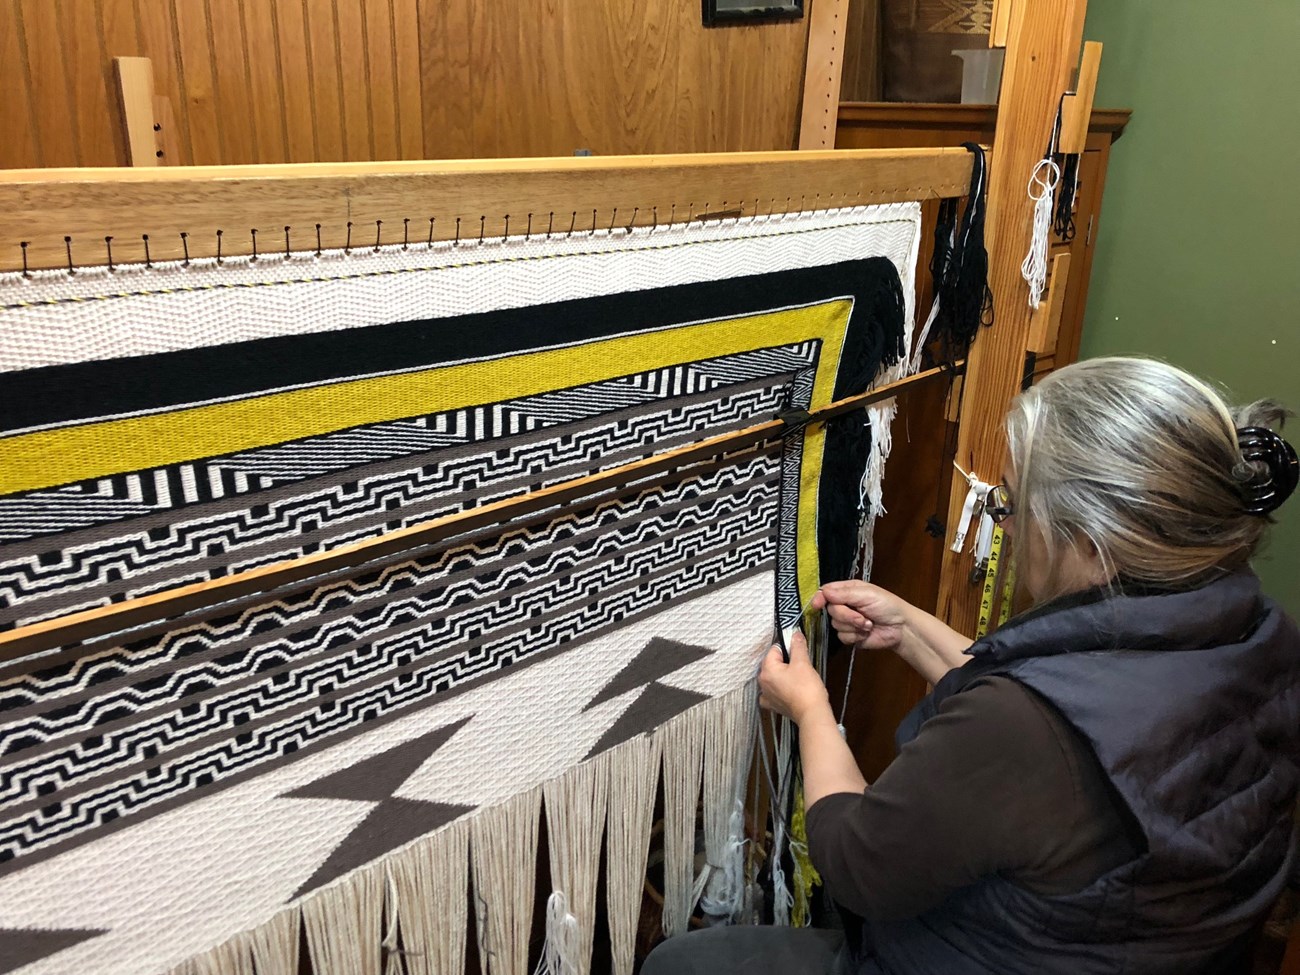 Documenting Klukwan's Woolen Weaving Traditions -- An Oral History and Documenting Cultural Traditions Project